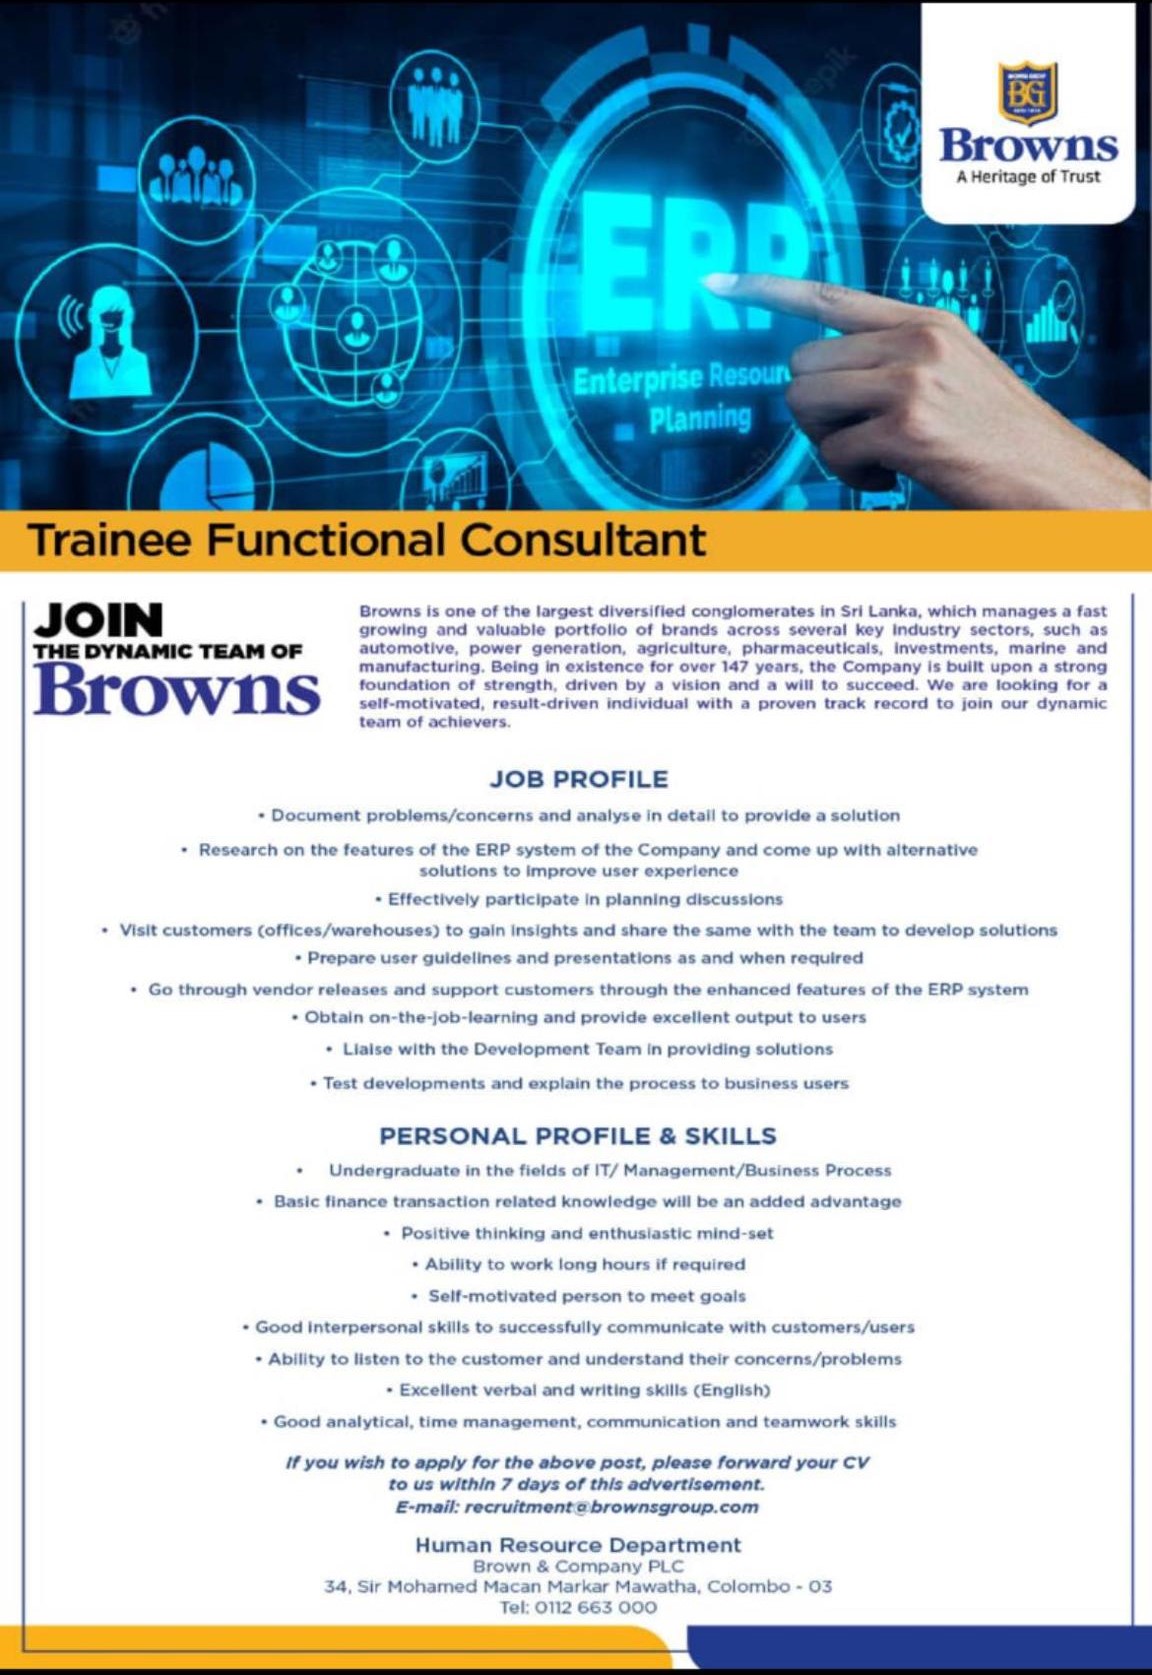 Trainee Functional Consultant Jobs Vacancies - Brown and Company PLC Job Vacancy